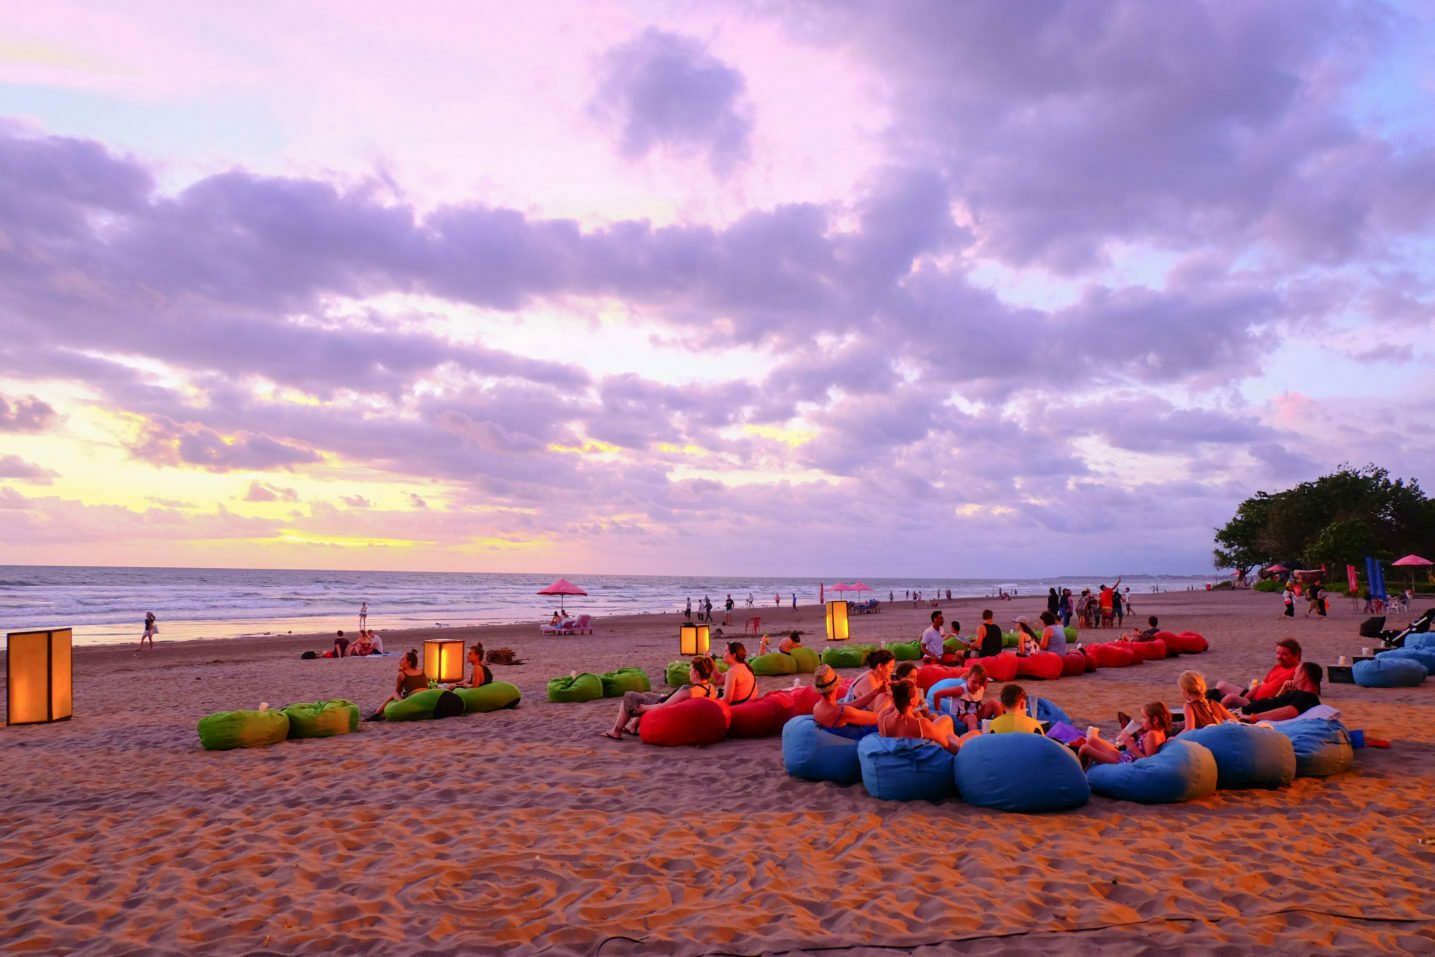 Best Bali Sunsets: Where to Watch the Sunset in Bali